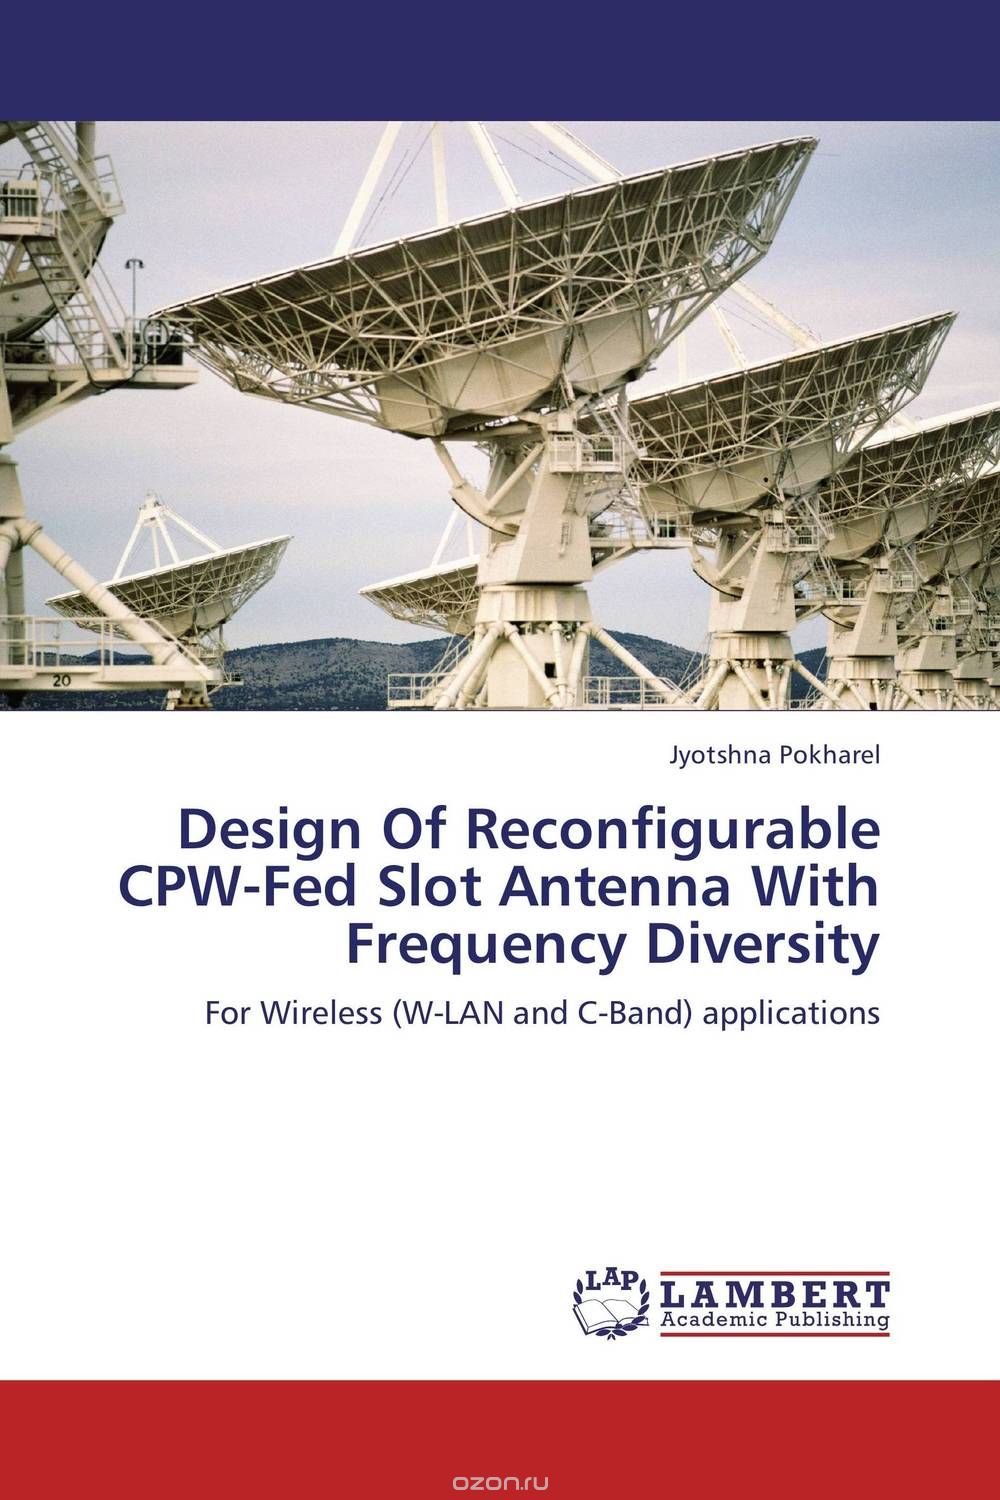 Design Of Reconfigurable CPW-Fed Slot Antenna With Frequency Diversity